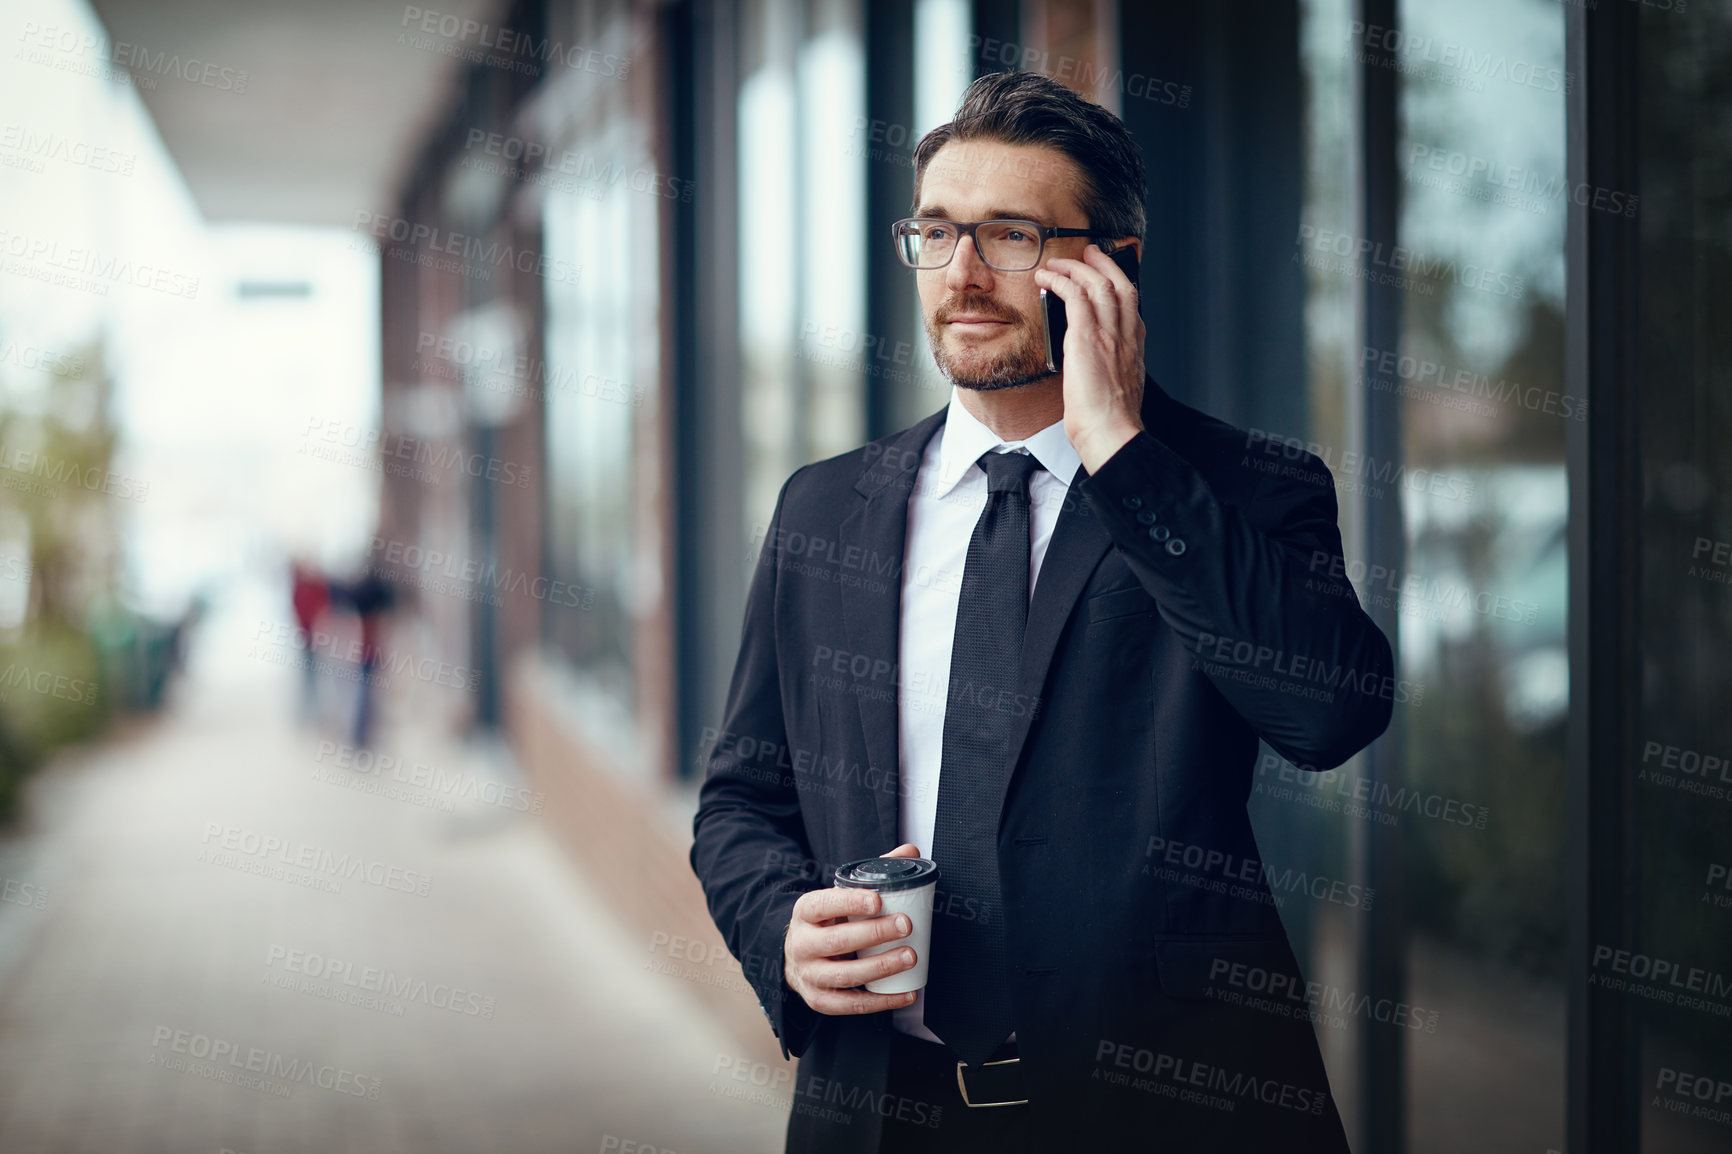 Buy stock photo Shot of a mature businessman talking on cellphone while out in the city